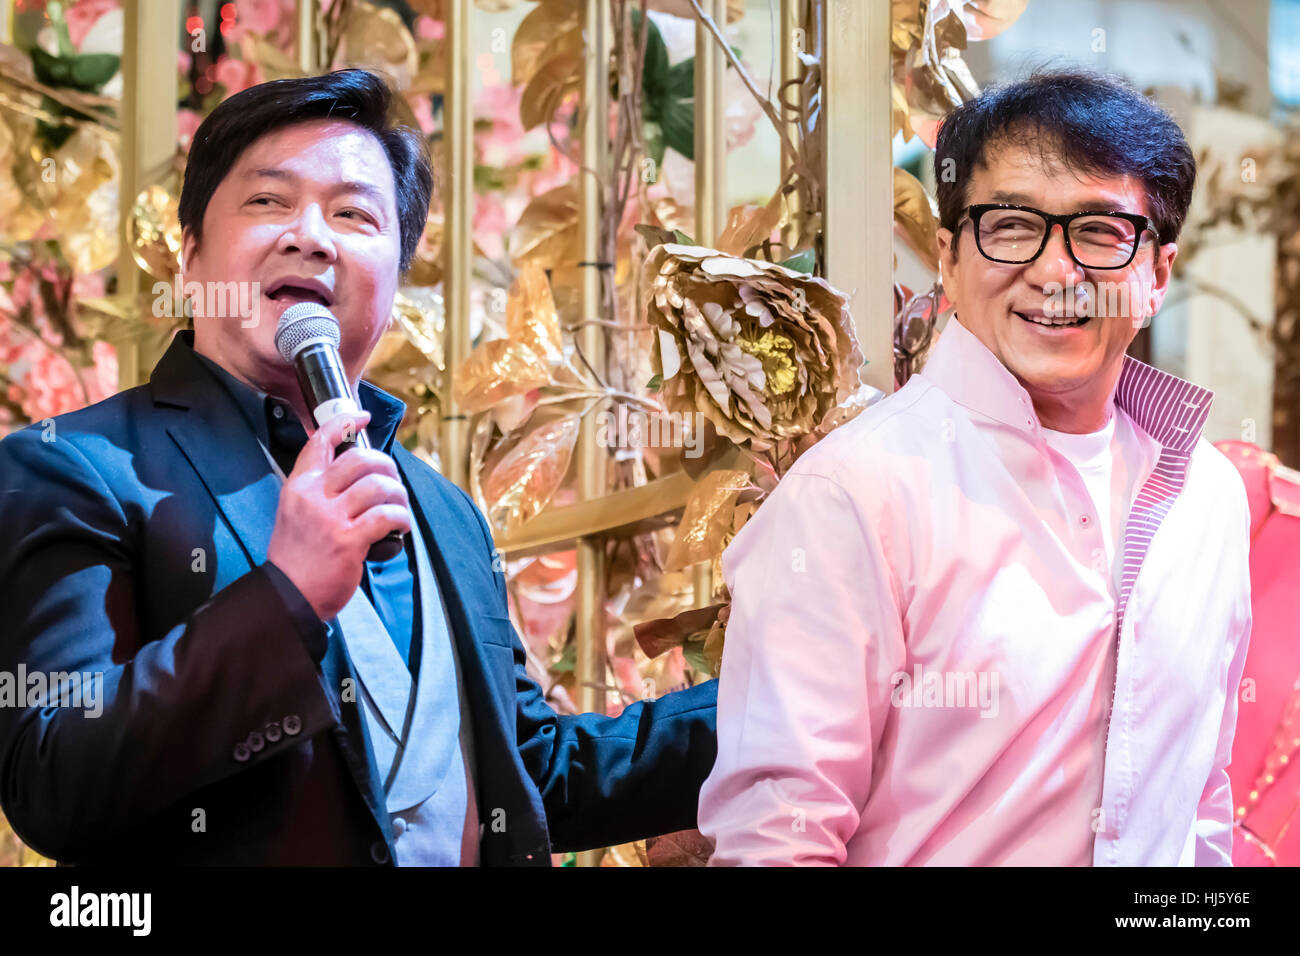 Kuala Lumpur, Malaysia. 21 Jan, 2017. Hong Kong director Stanley Tong with superstar actor Jackie Chan on their promotion tour for their upcoming new movie Kung Fu Yoga in Kuala Lumpur, opening in the Chinese New Year 2017. © Danny Chan/Alamy Live News. Stock Photo